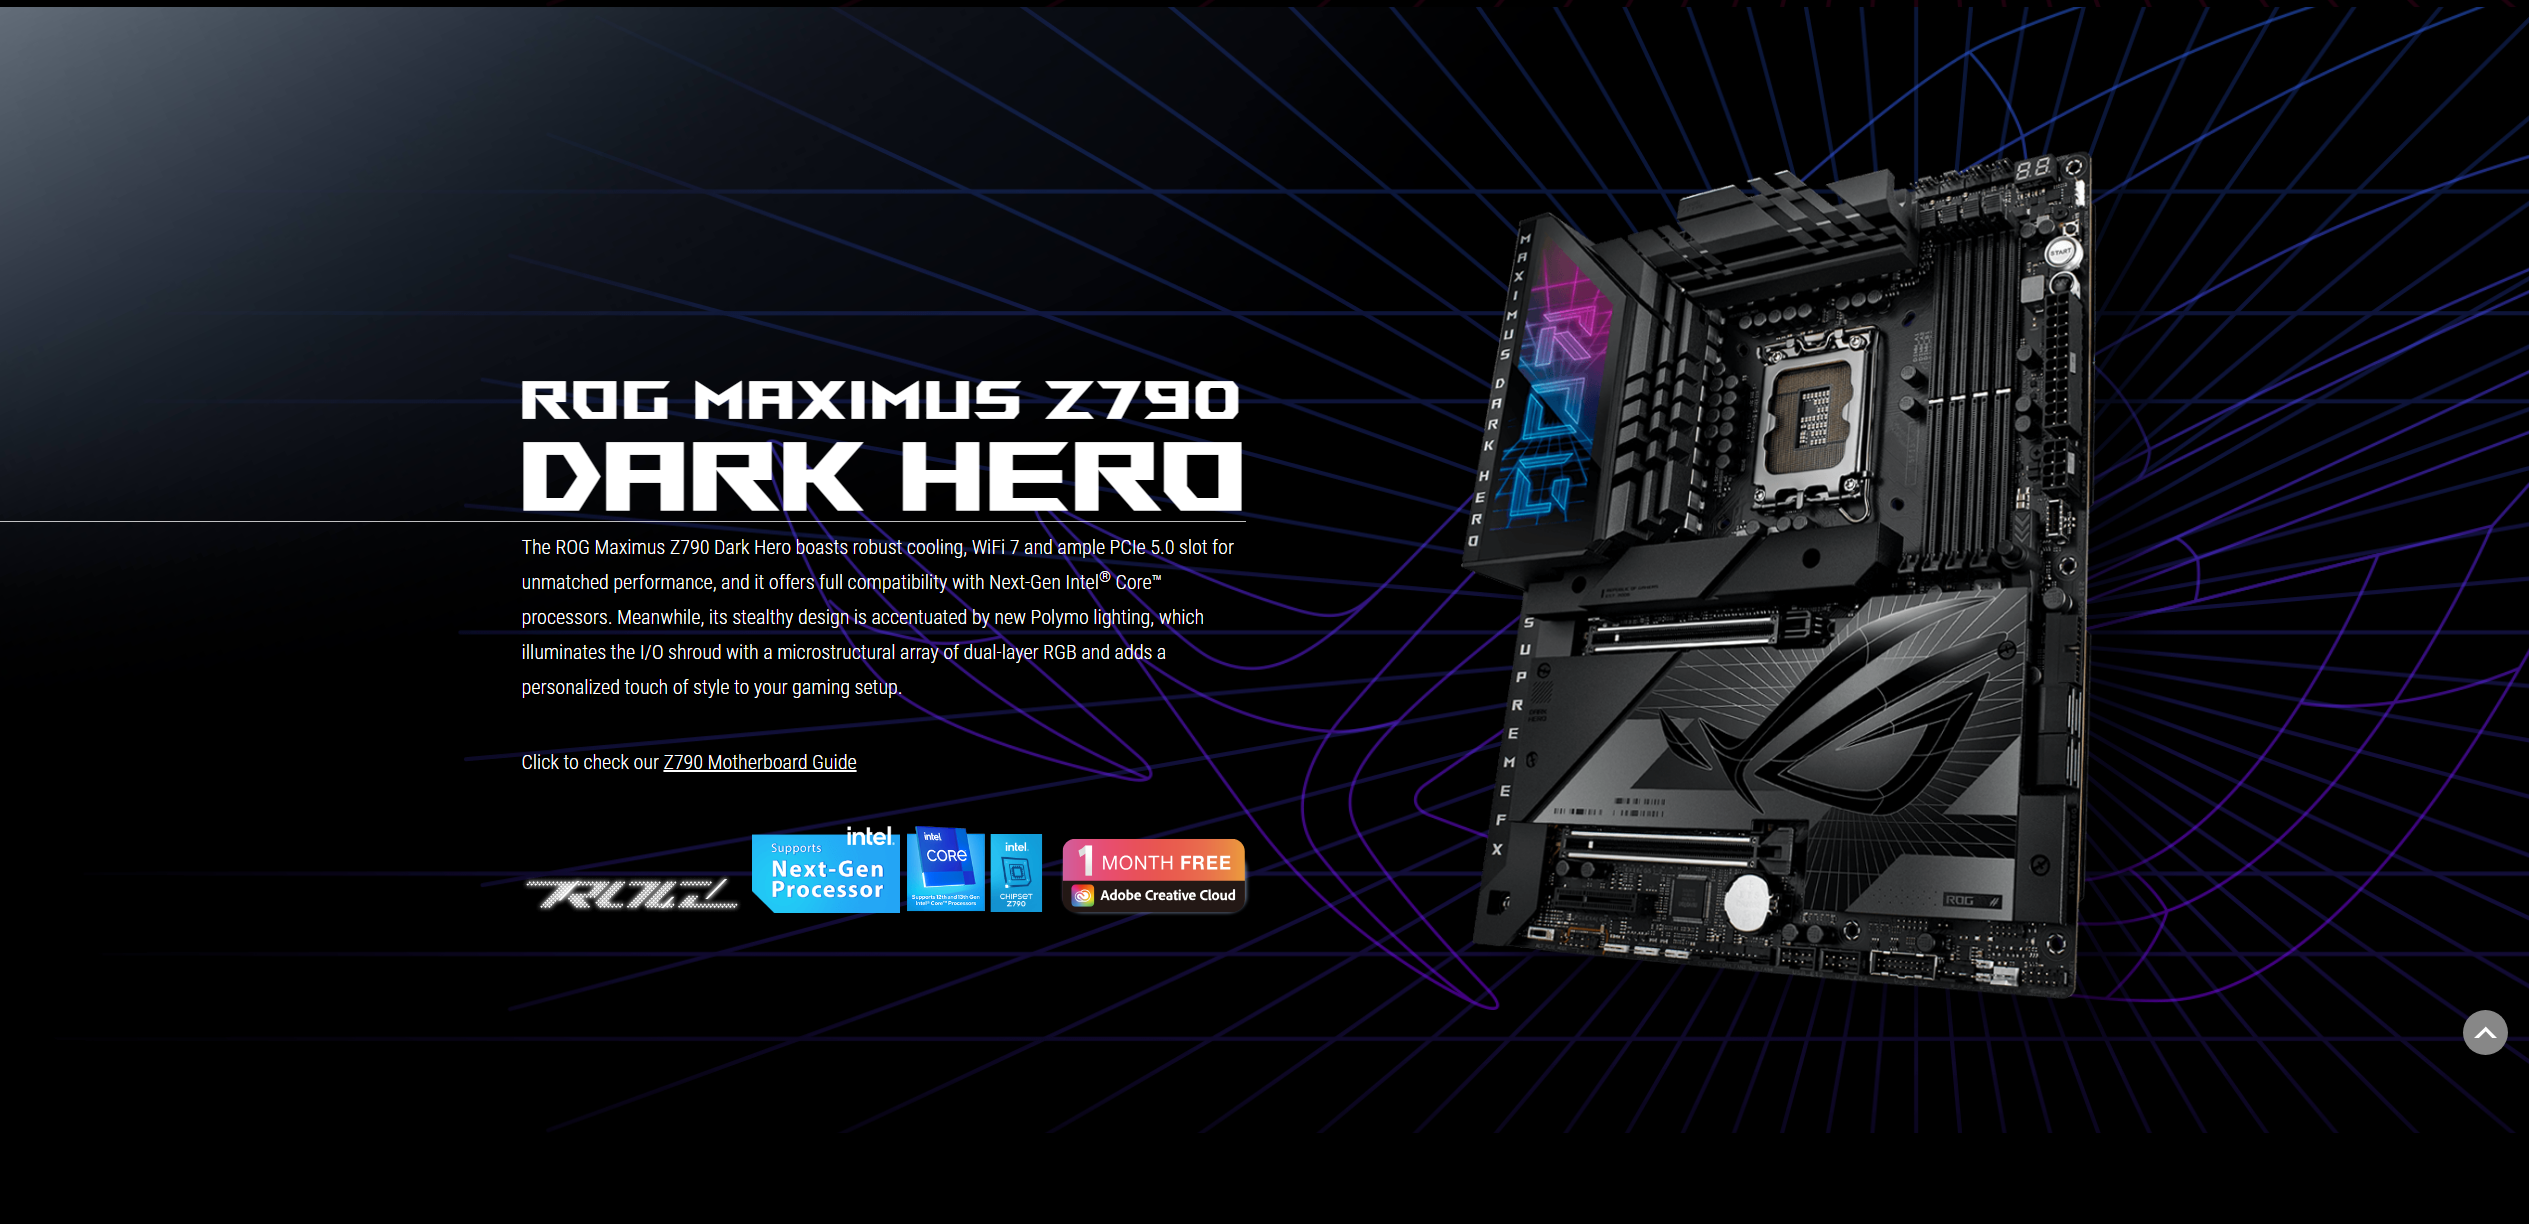 A large marketing image providing additional information about the product ASUS ROG Maximus Z790 Dark Hero LGA1700 ATX Desktop Motherboard - Additional alt info not provided